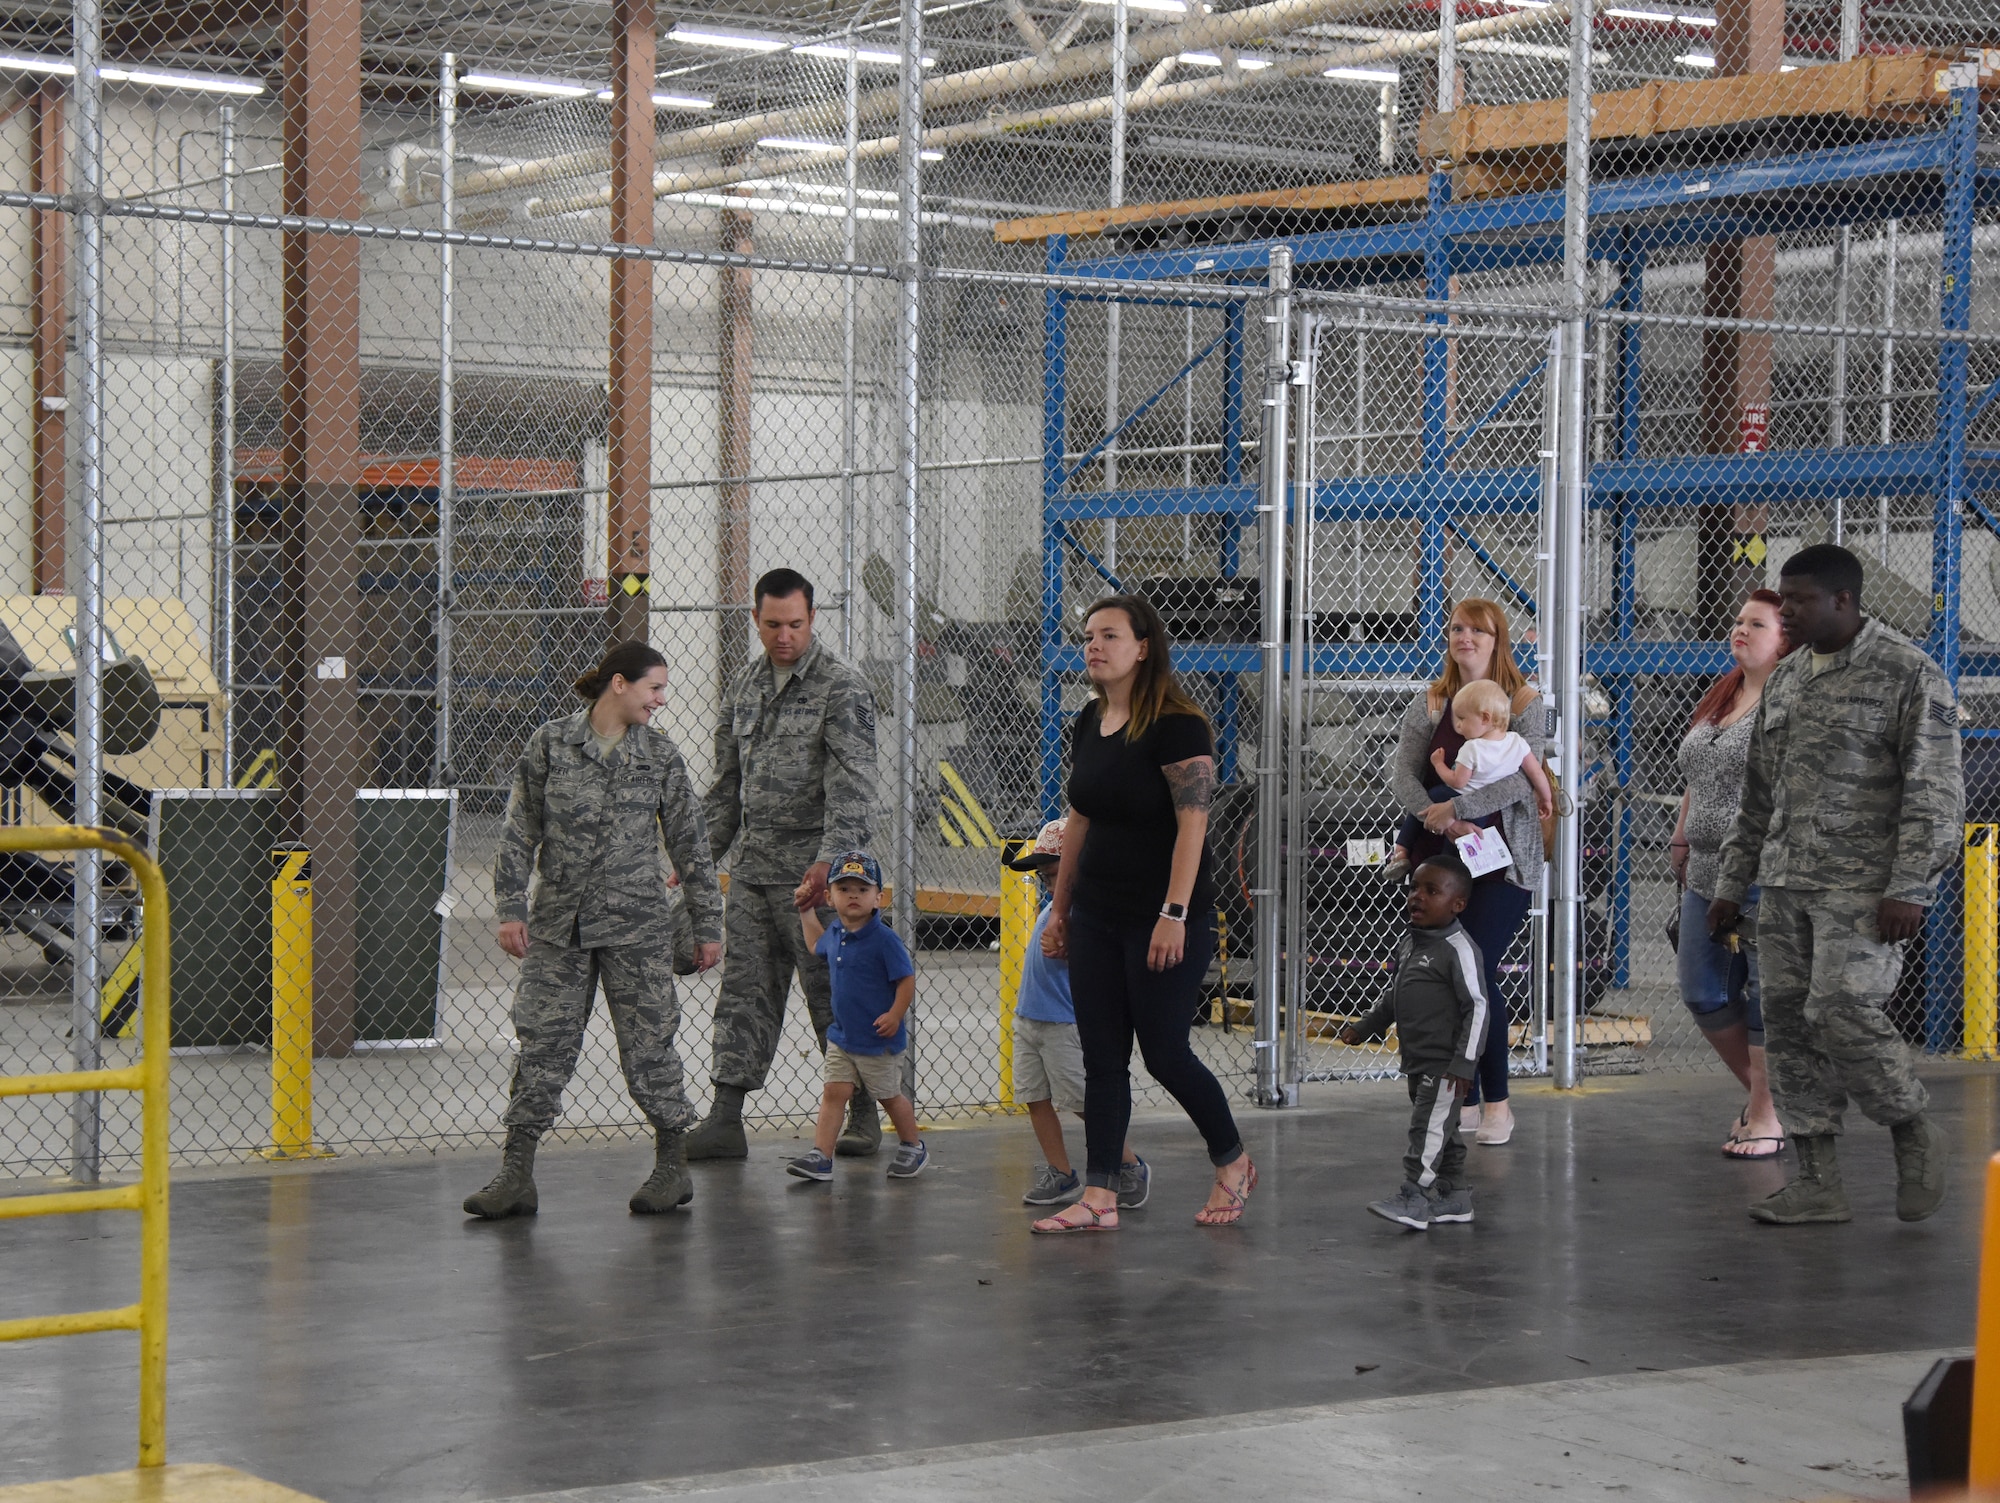 Members of the 81st Logistics Readiness Squadron take their children on a tour of the supply warehouse at the Taylor Logistics Center during the 81st LRS Bring Your Child to Work Day event at Keesler Air Force Base, Mississippi, April 26, 2018. The event allowed children the opportunity to experience what their parents do at work by touring facilities while receiving hands-on experiences. (U.S. Air Force photo by Kemberly Groue)